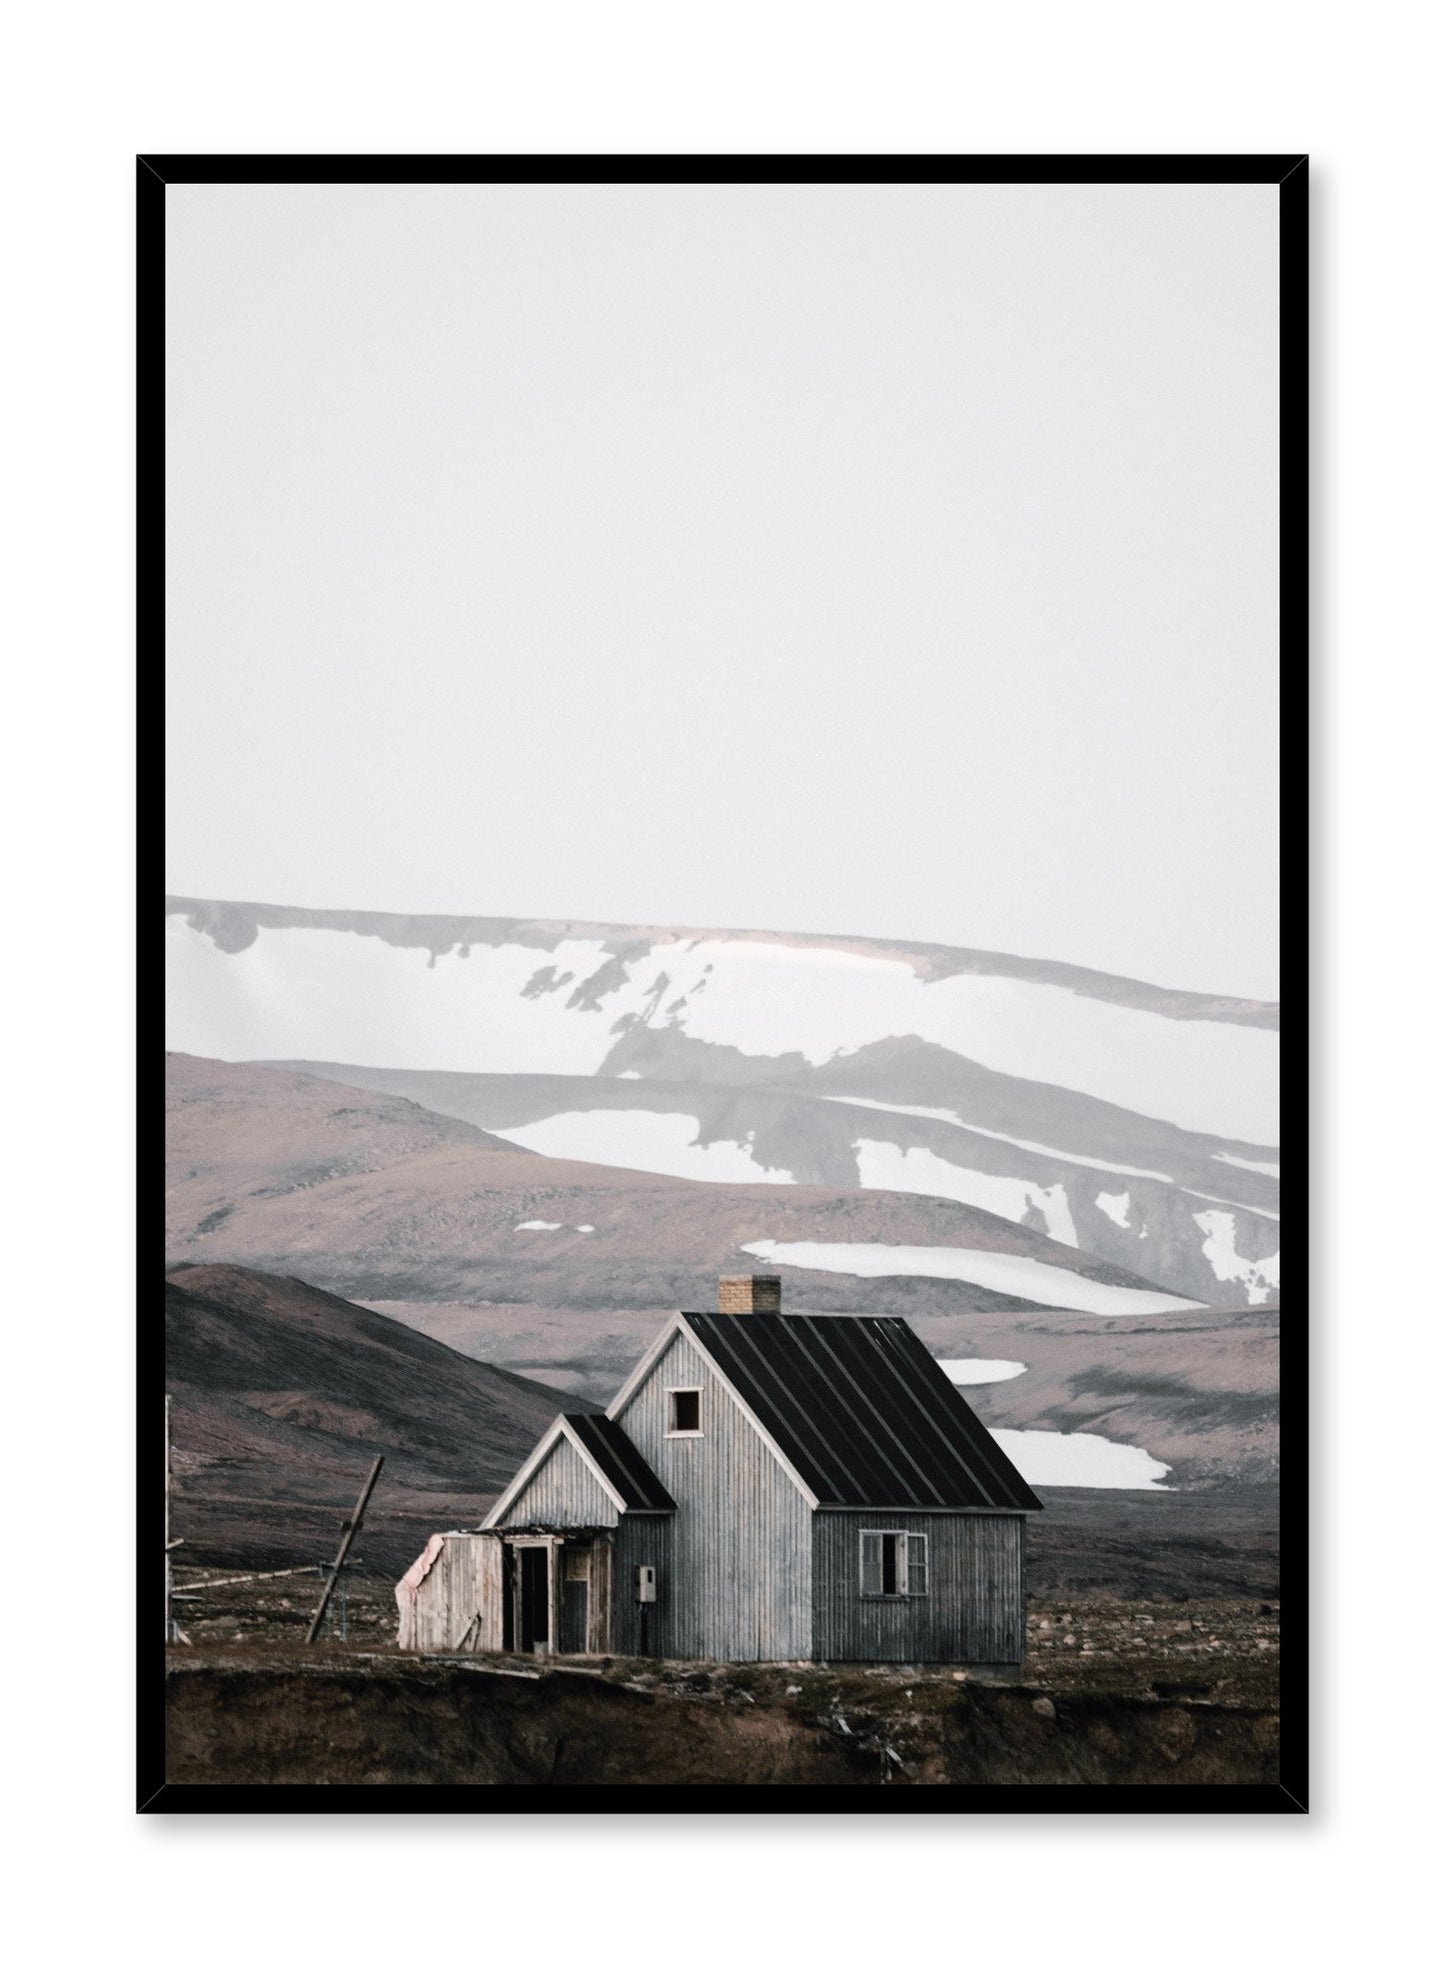 Minimalist design poster by Opposite Wall with farm landscape photography